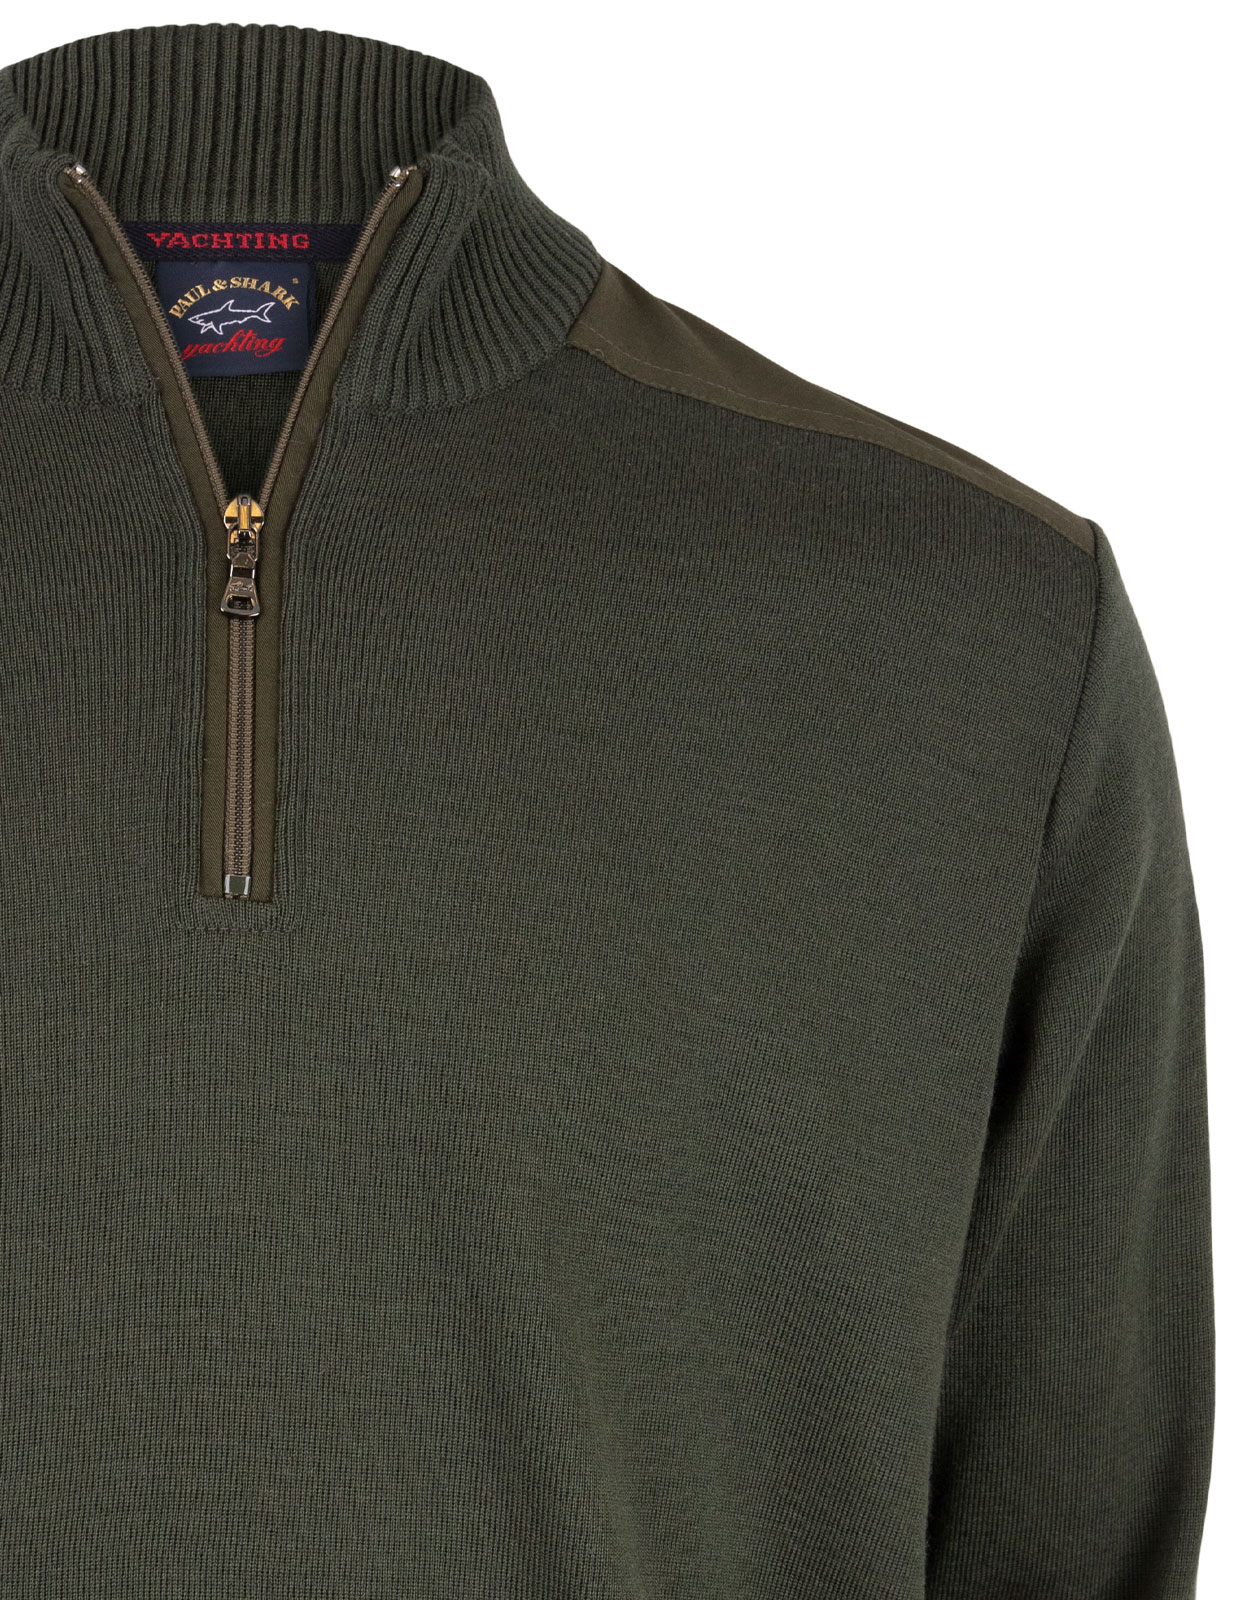 Yachting Wool Turtleneck Sweater Olive Stl S